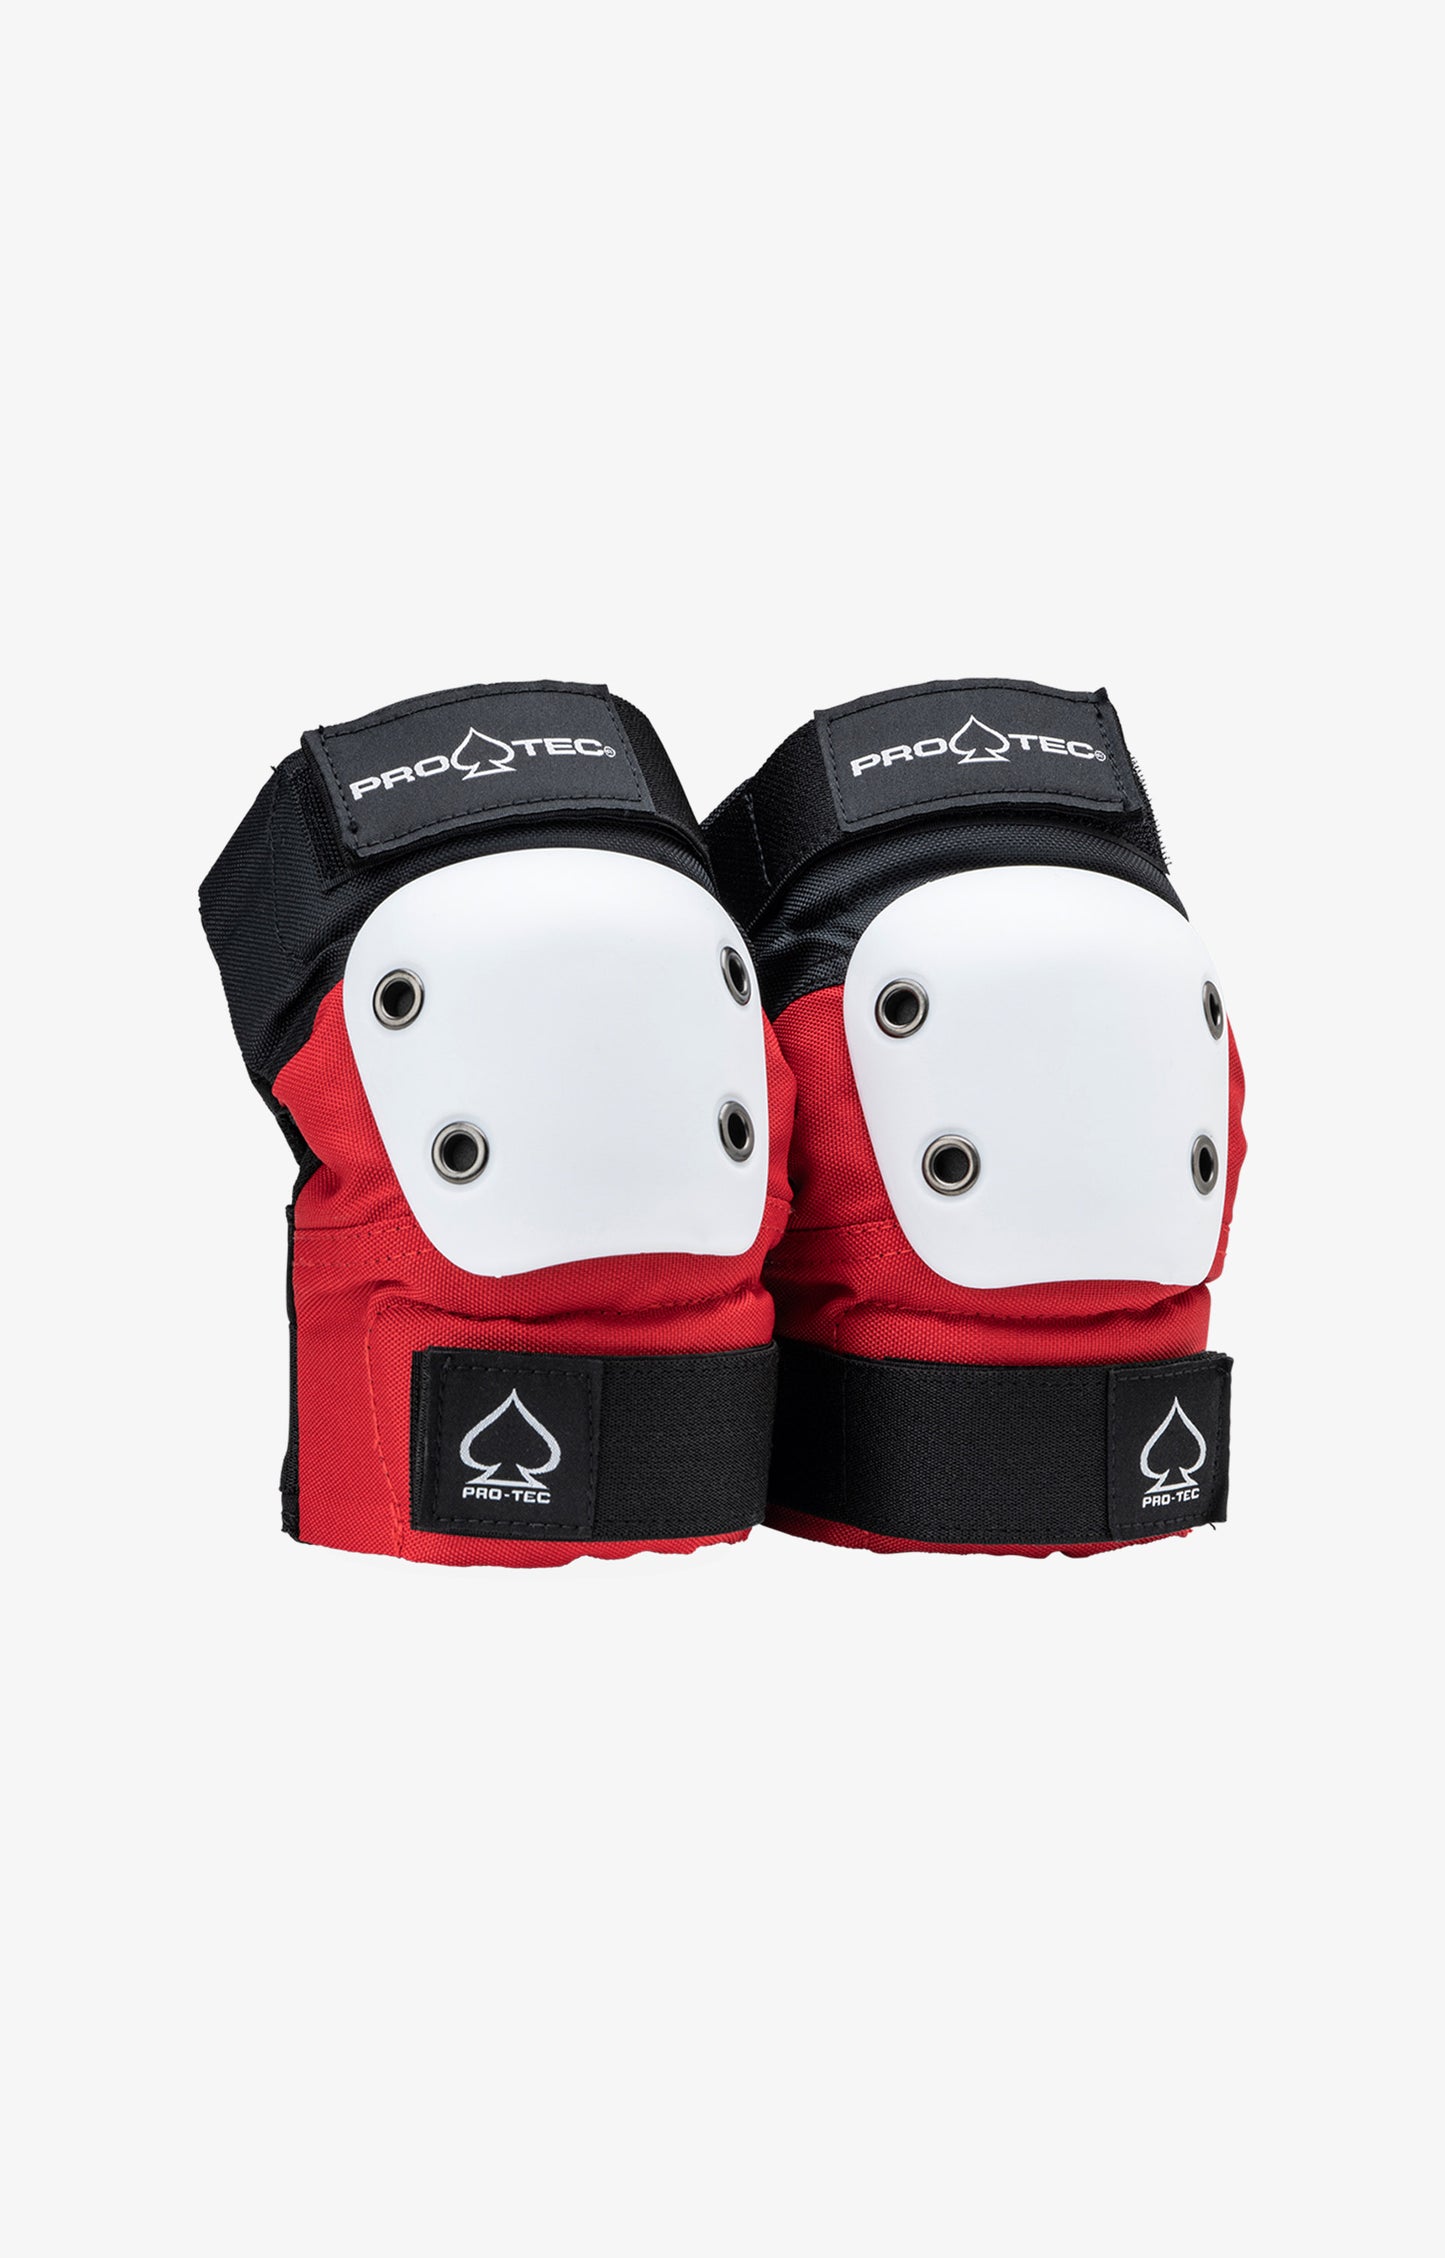 Pro-Tec Street Junior Protective 3 Pack Wrist Guards and Pads, Red